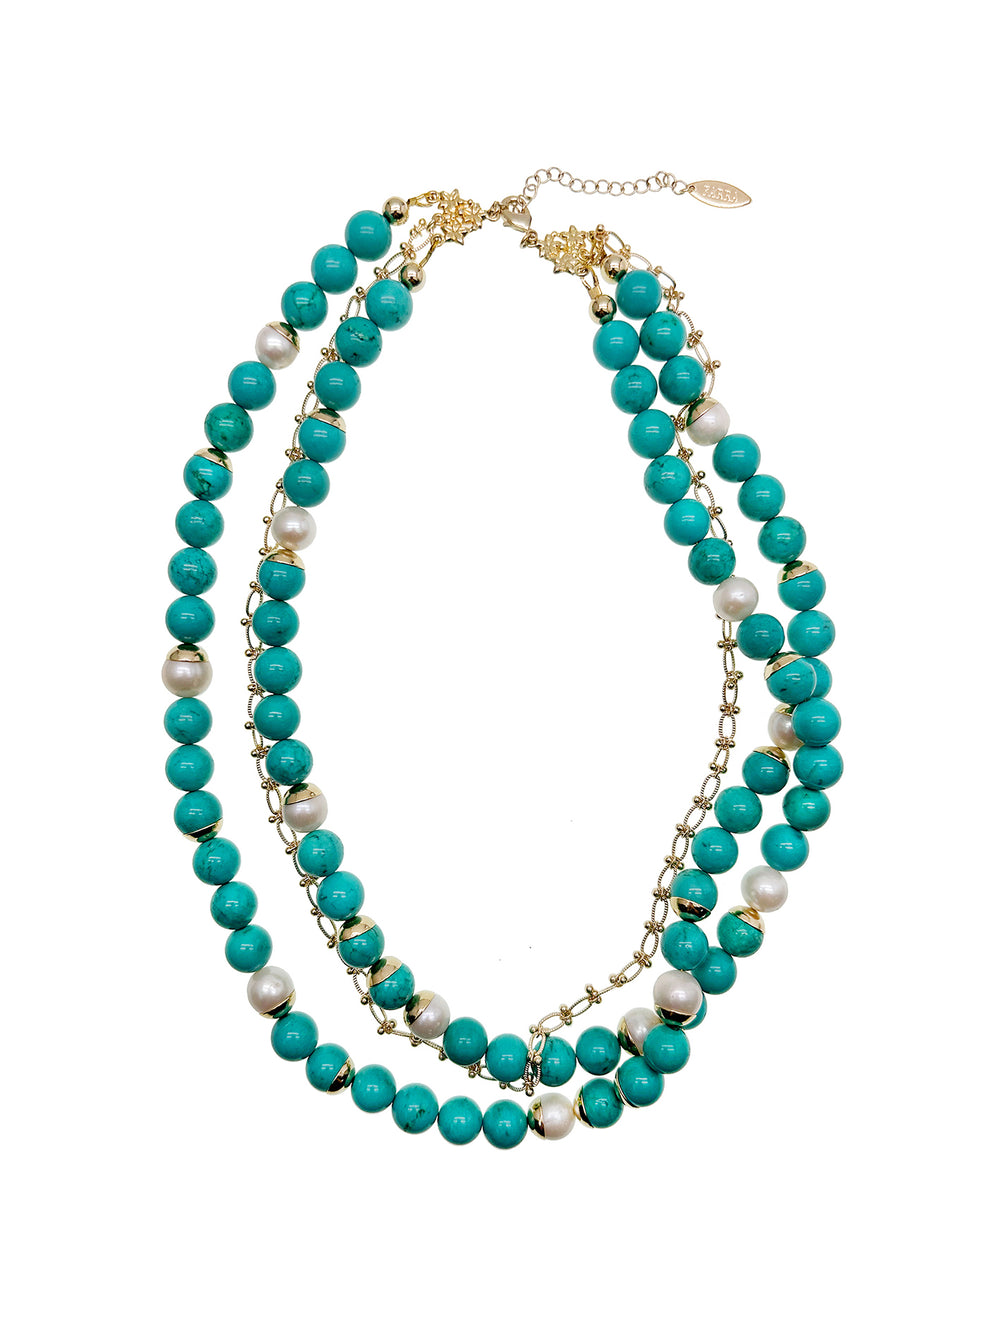 Turquoise & Freshwater Pearls Double Strands Necklace KN015 - FARRA